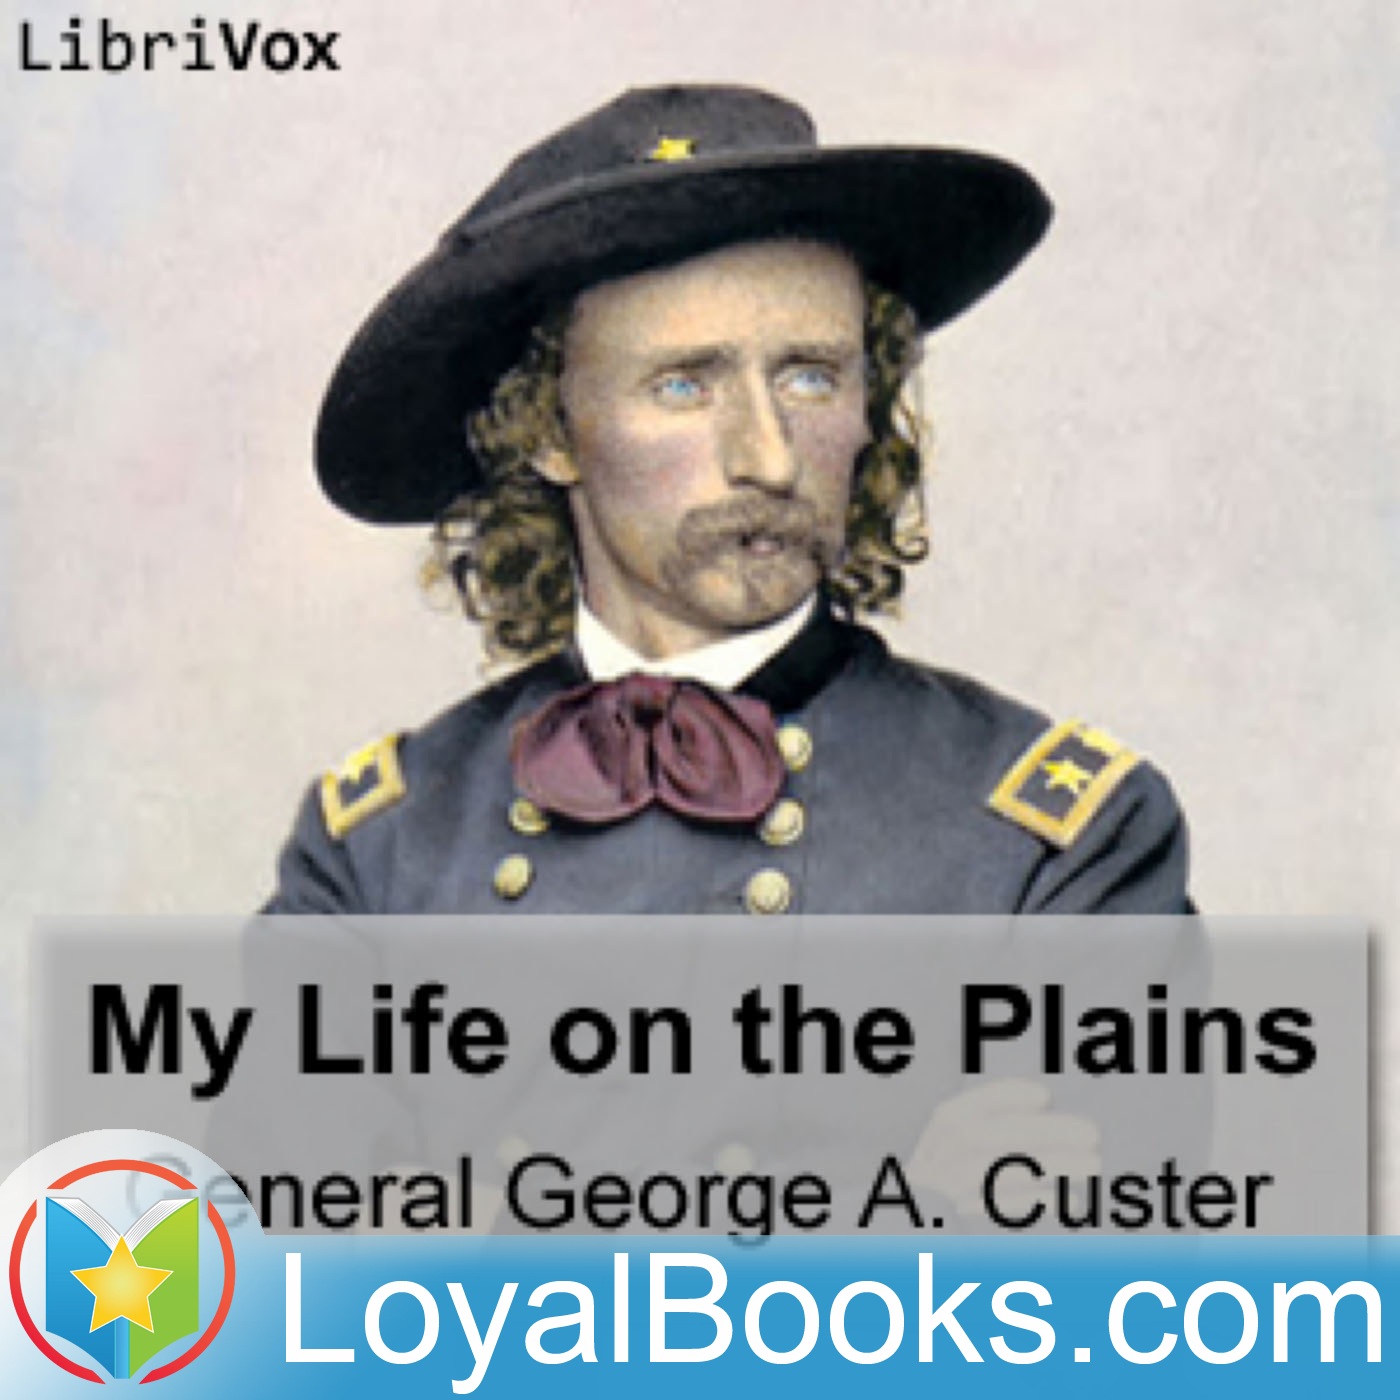 My Life on the Plains by Gen. George A. Custer